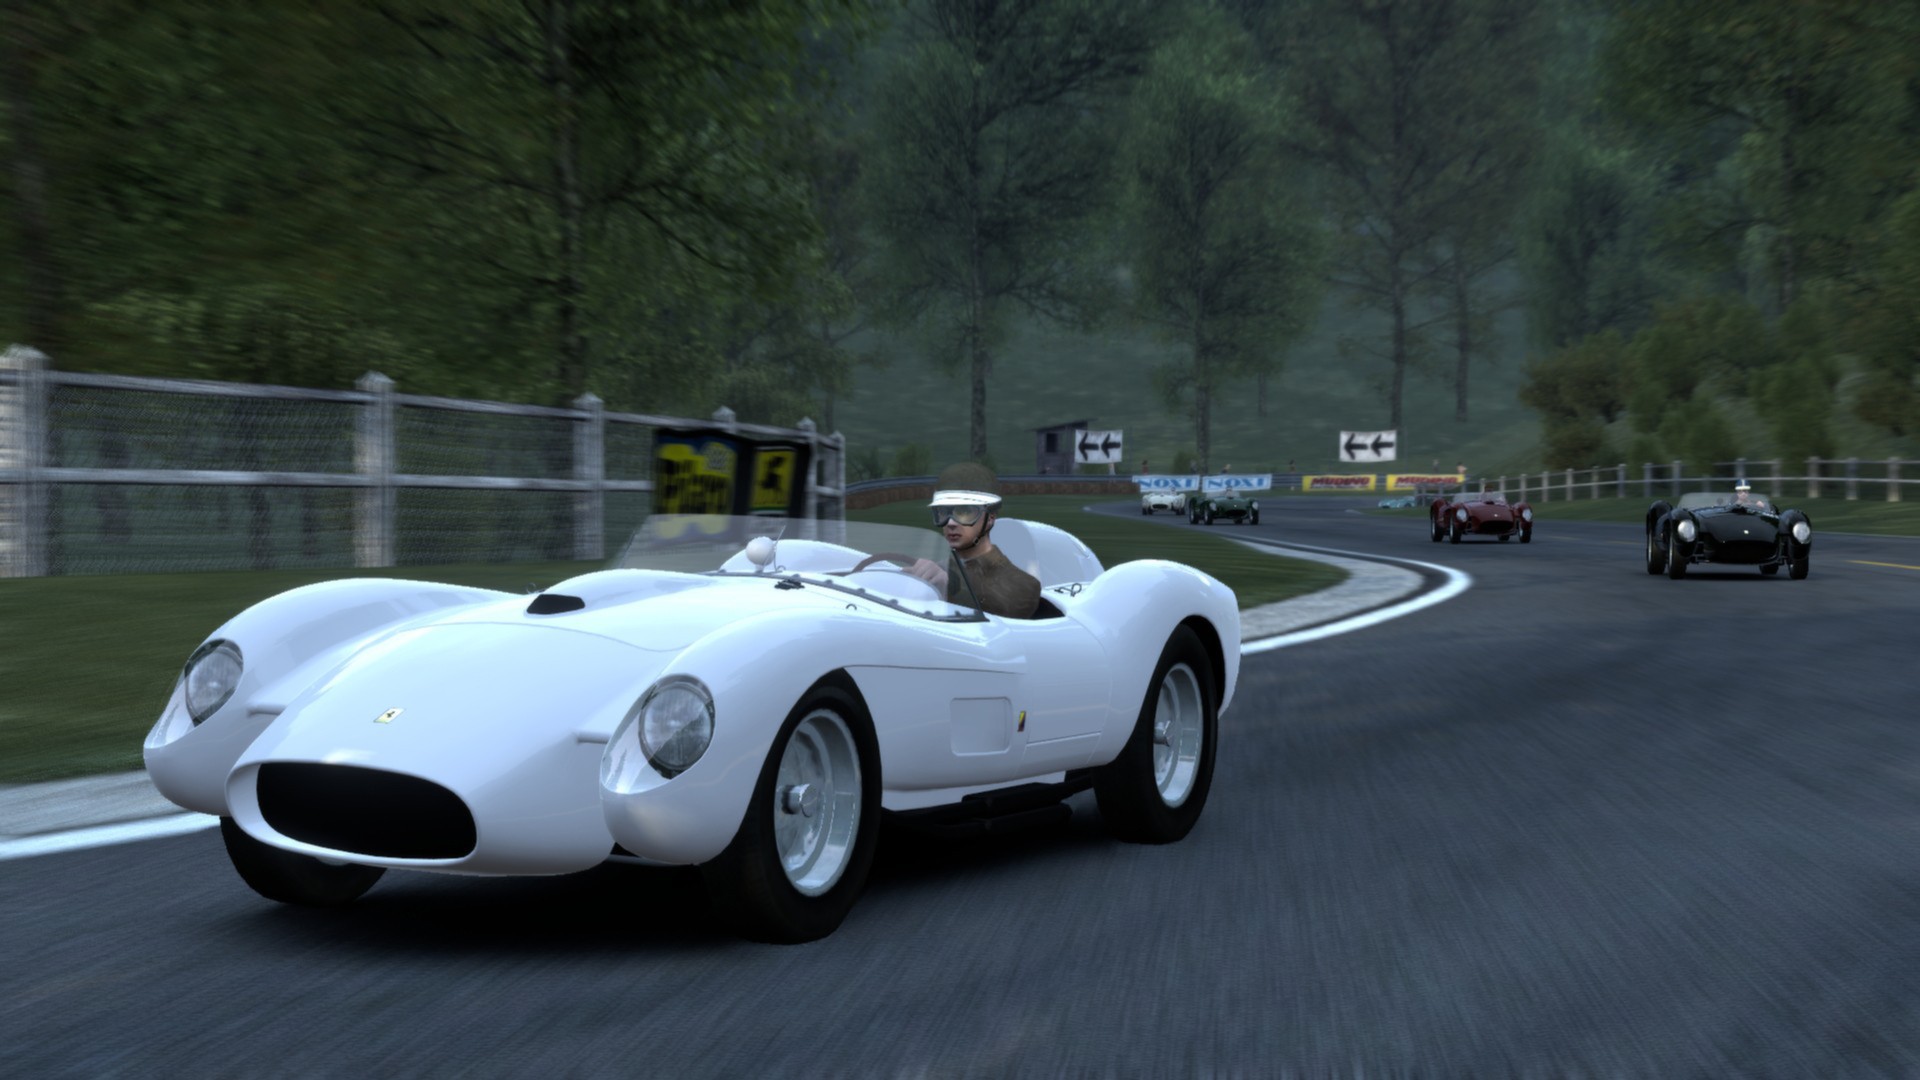 Test Drive: Ferrari Racing Legends (SKIDROW) FREE DOWNLOAD for PC | Steam Cracked Games